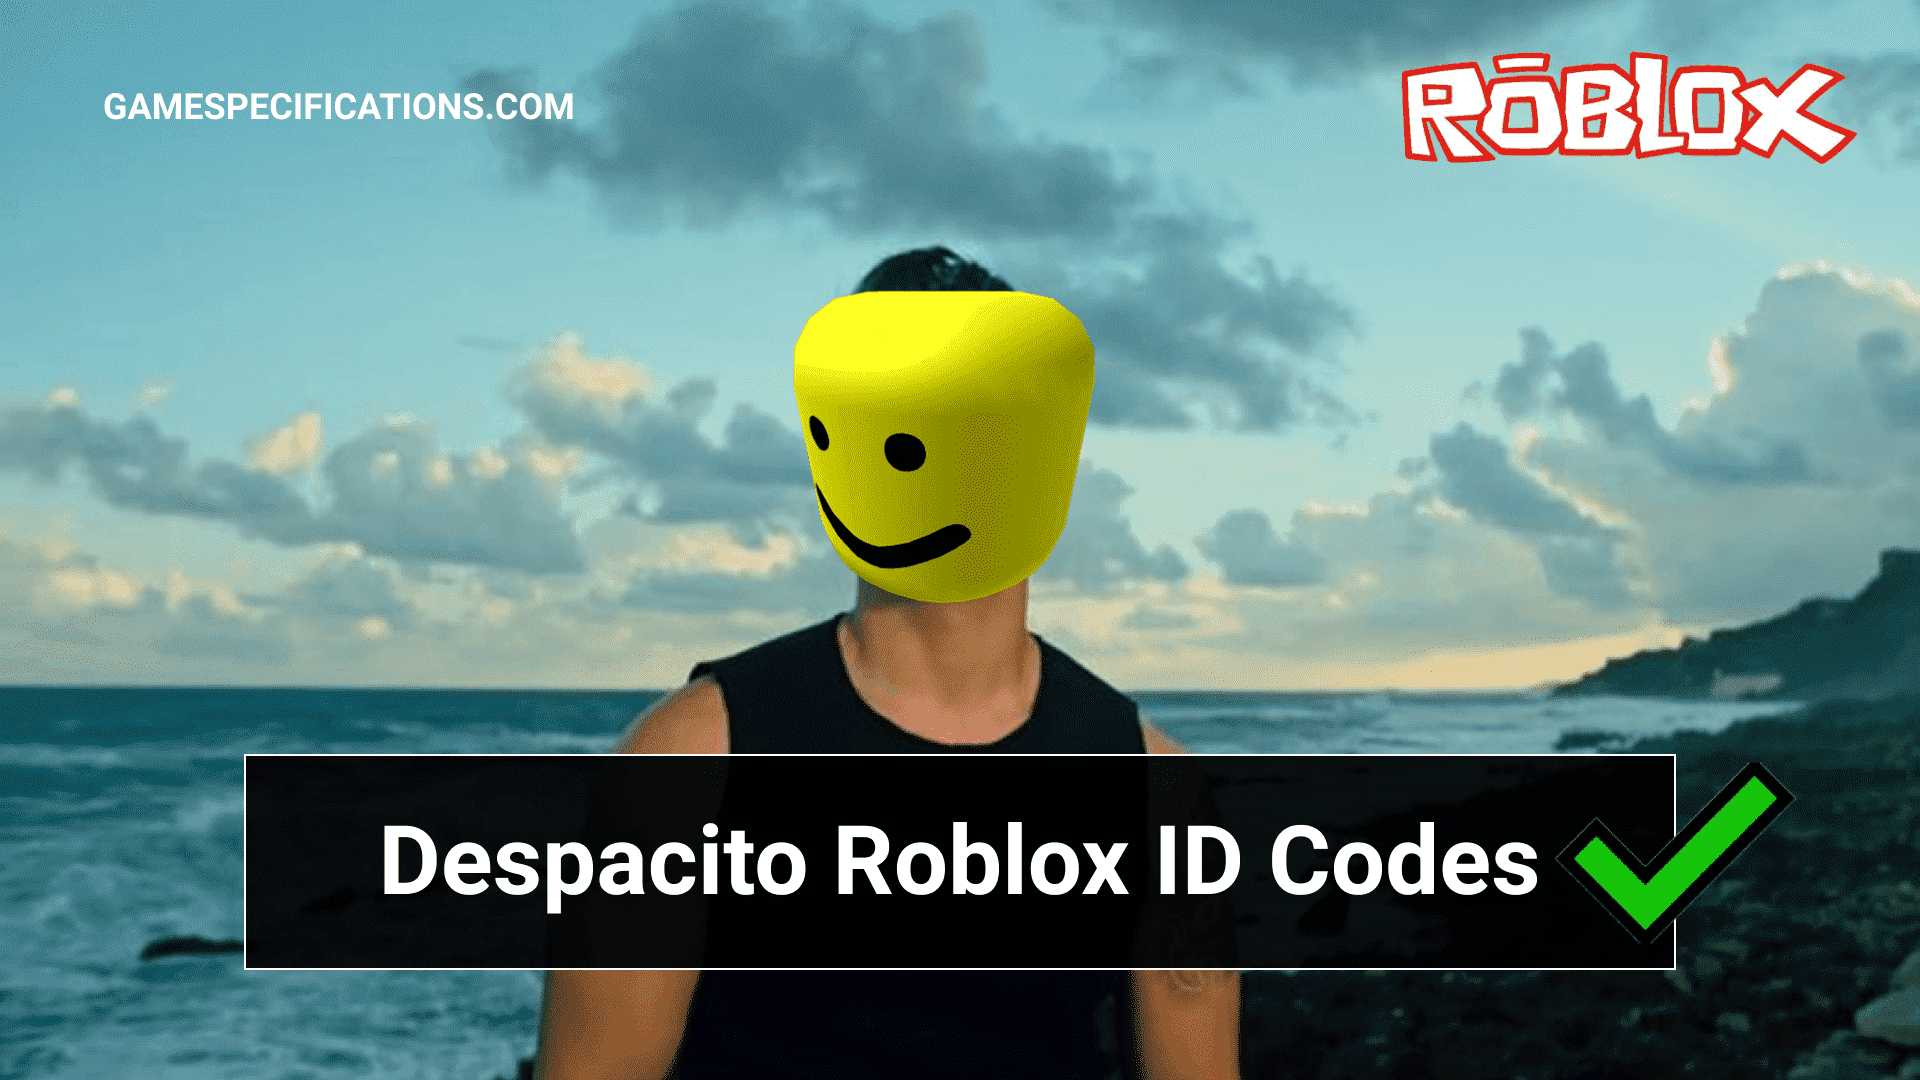 Despacito Roblox Id Codes To Play Awesome Spanish Song 2021 Game Specifications - flamingo sings despacito loud roblox id